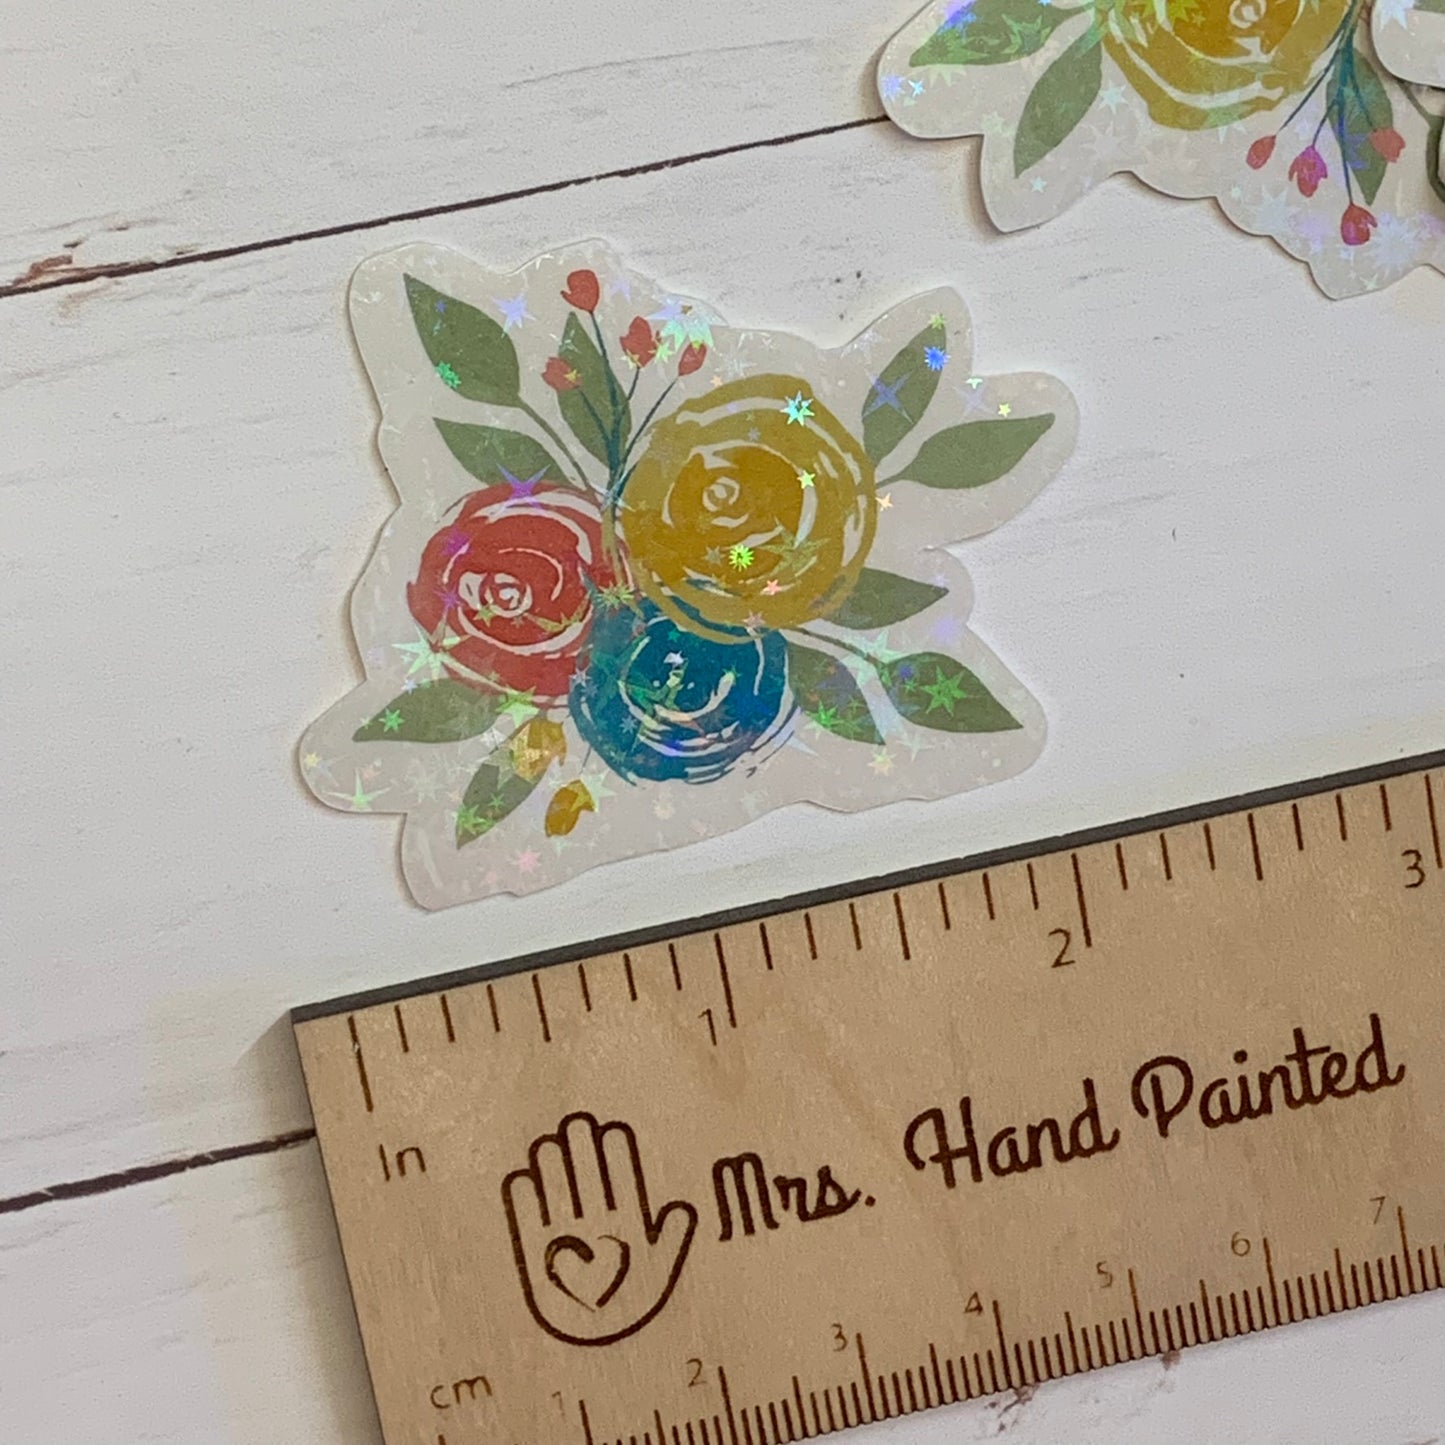 Watercolor Florals with Holographic Overlay Die Cut Laminated Vinyl Sticker